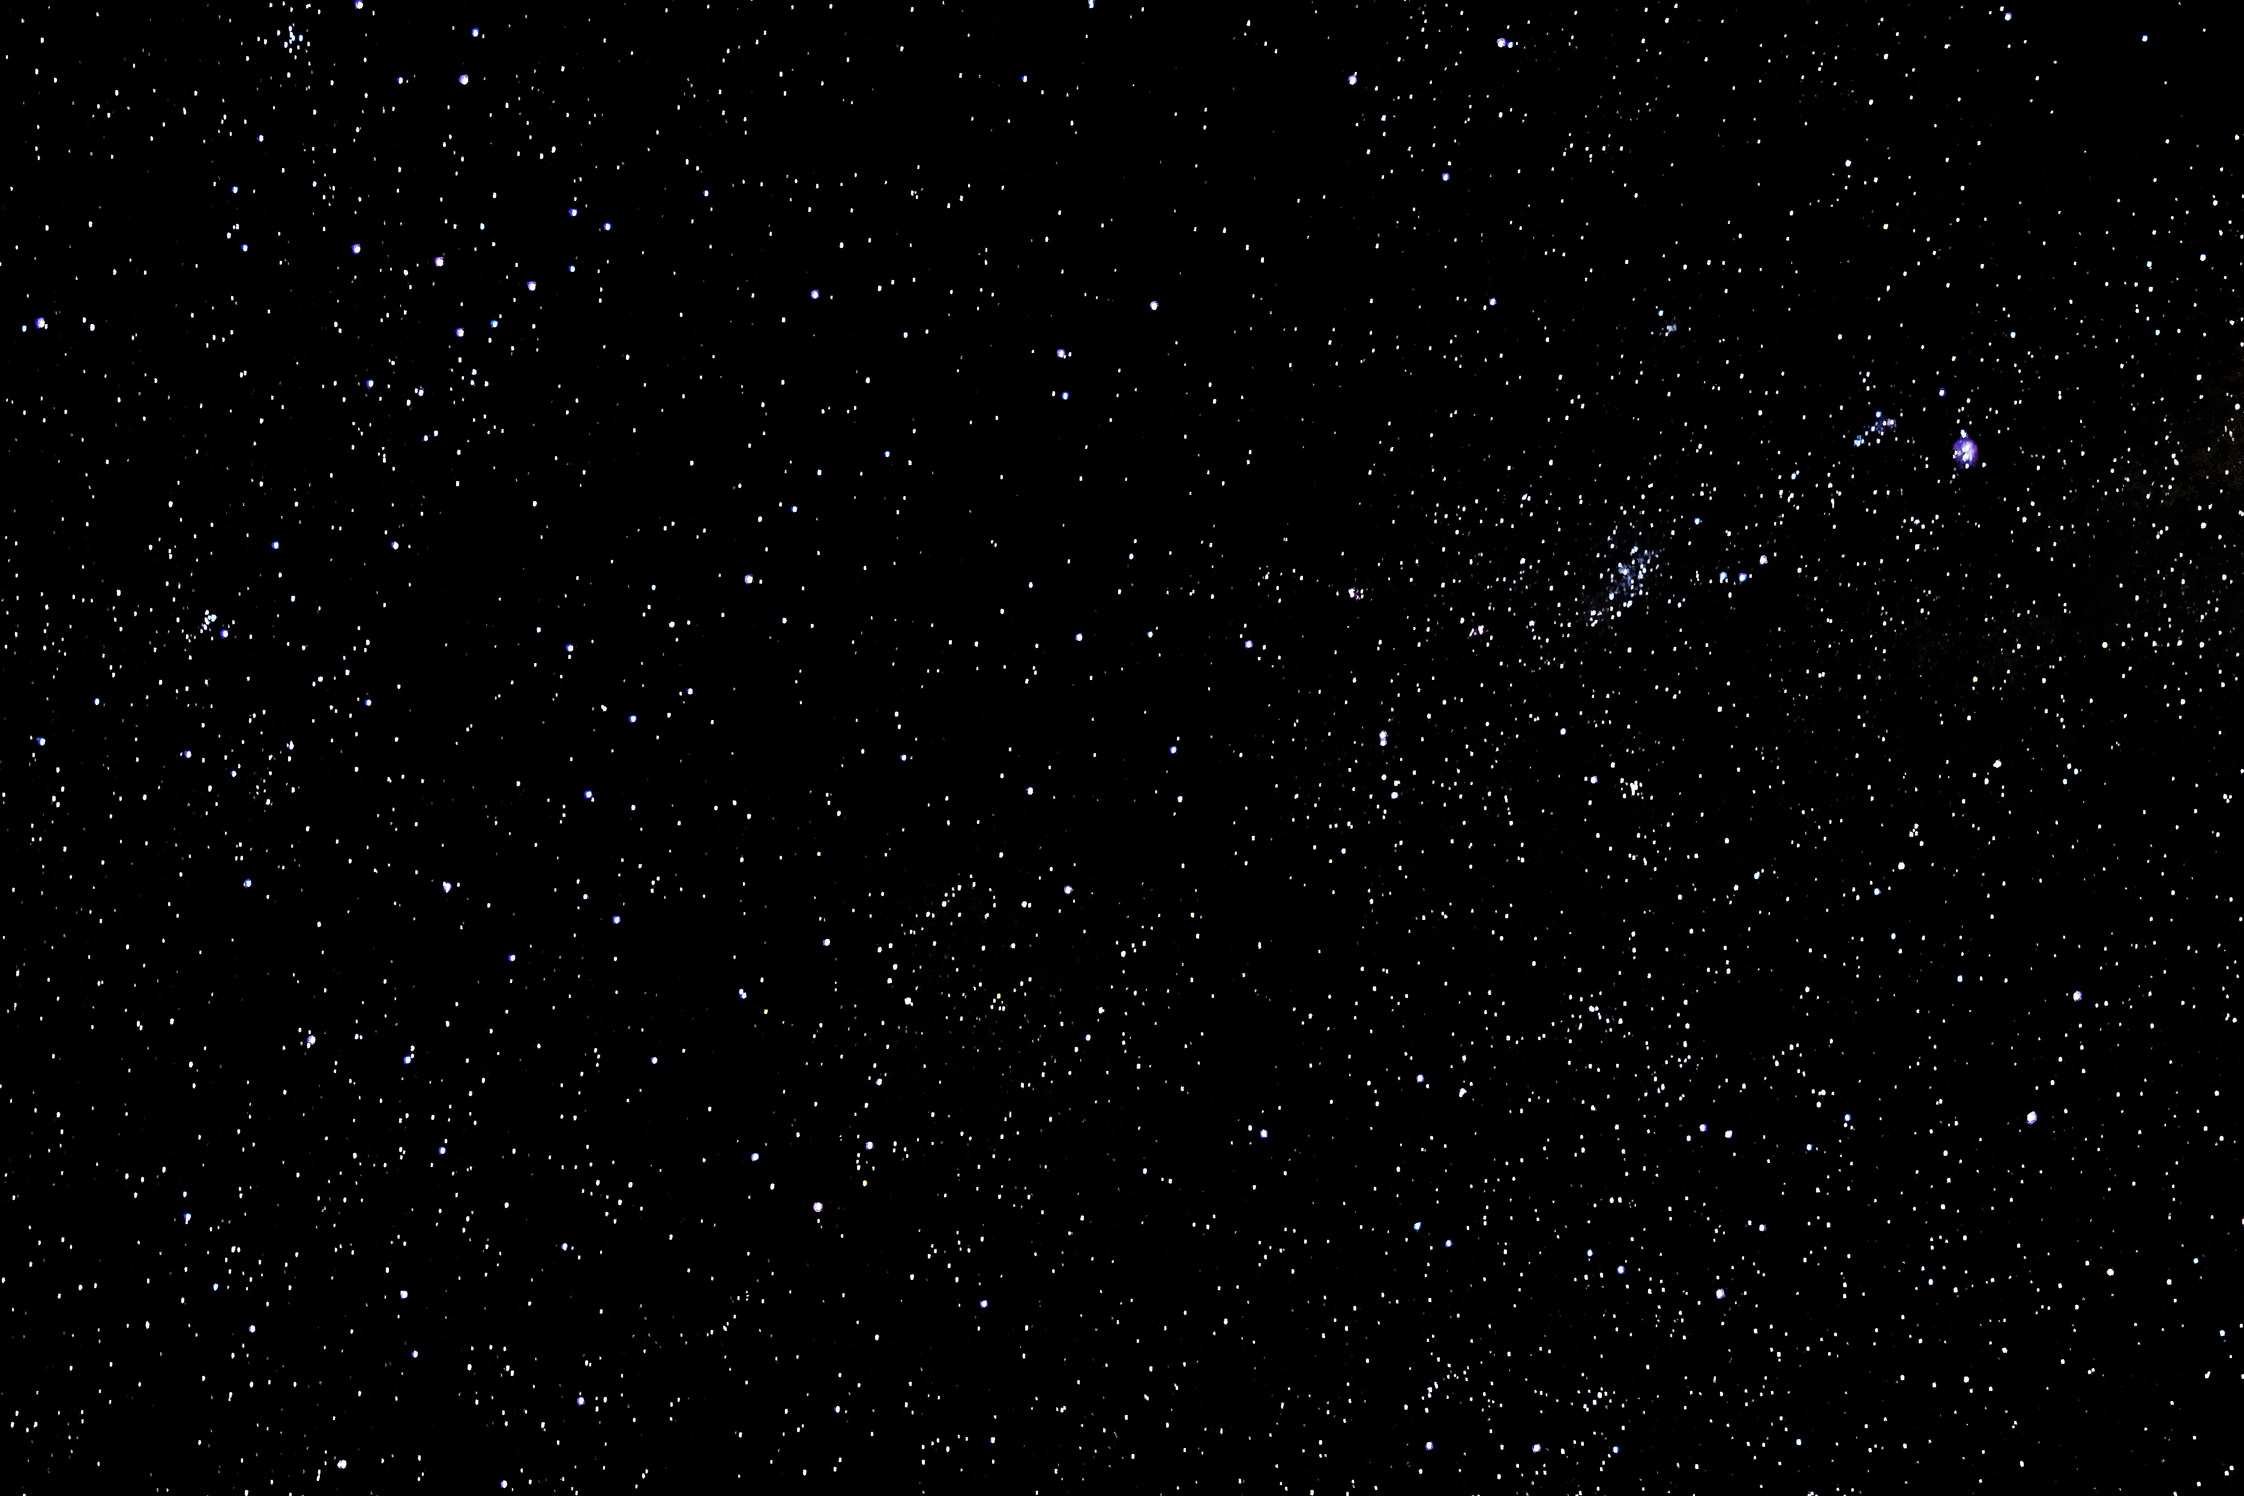 Stars and galaxy outer space sky night universe black starry background of starfield